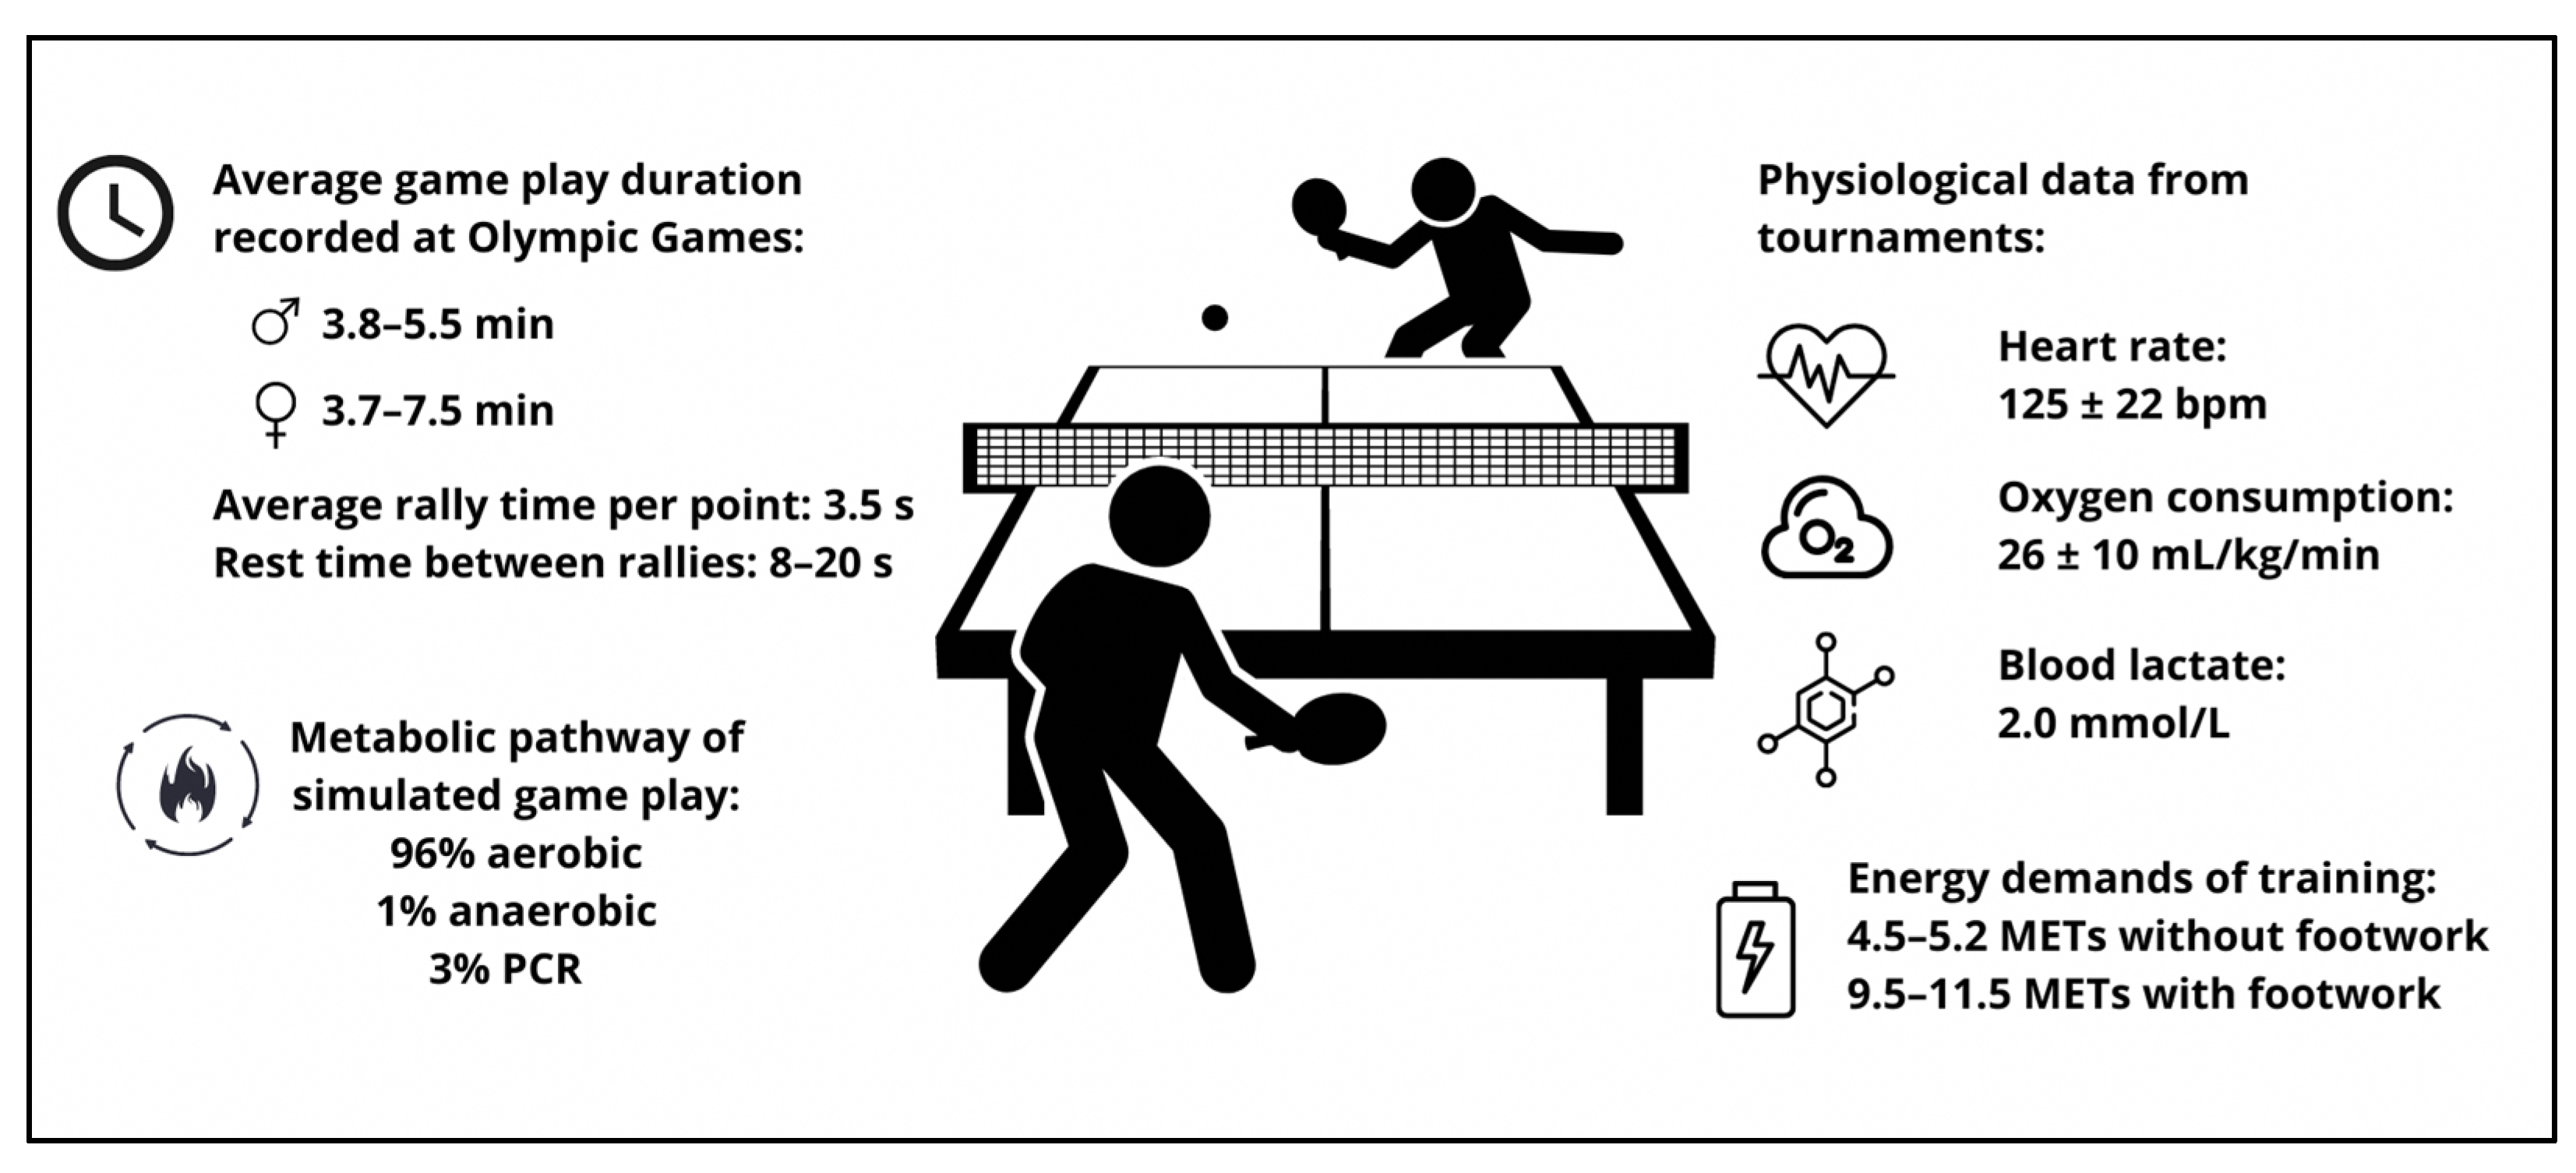 3 Strange Table Tennis Rules That You Never Knew